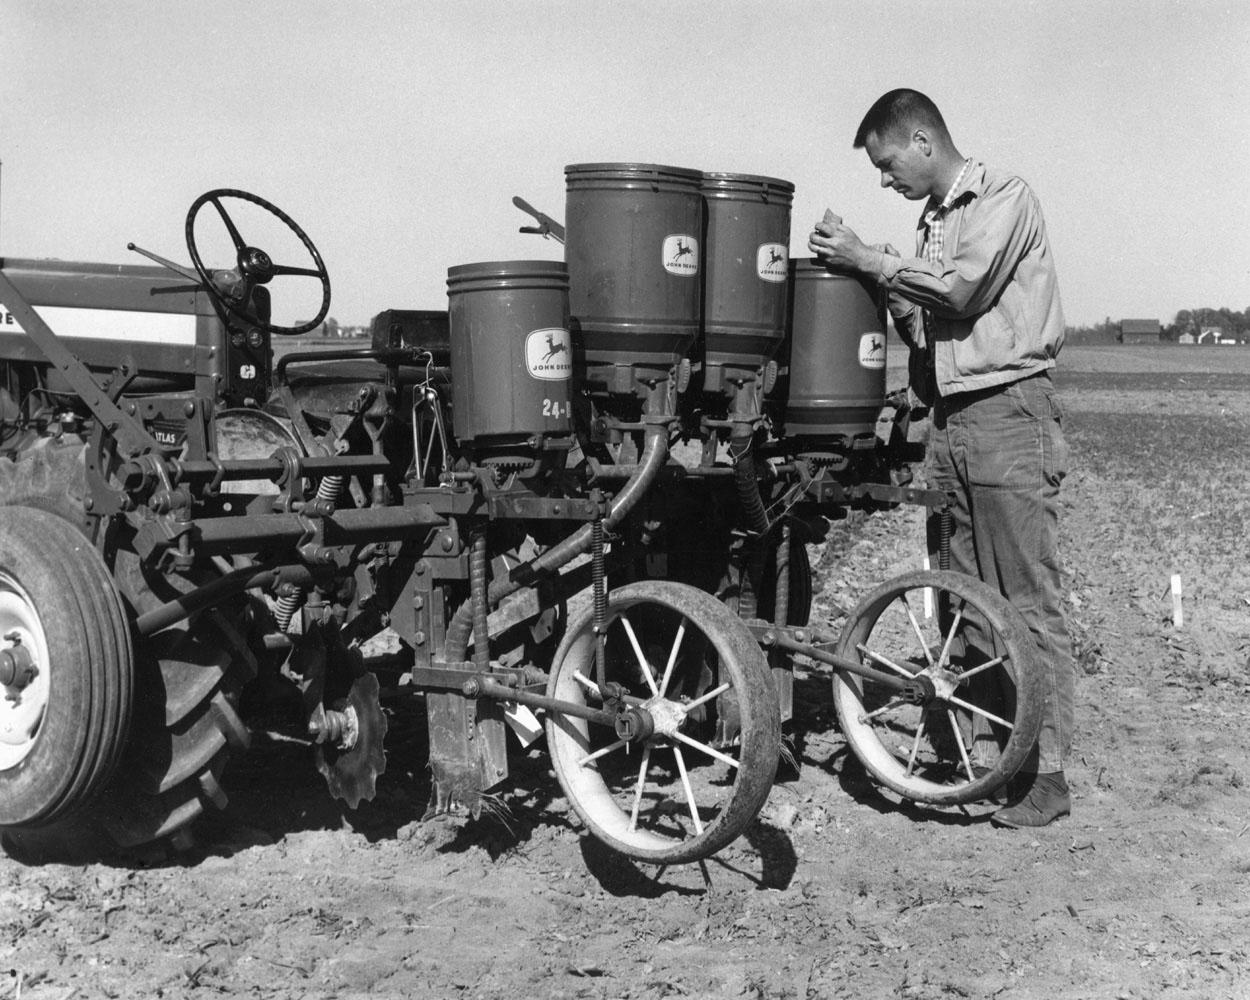 In 1964, agronomist Glover Triplett was conducting pioneering research in no-till farming at Ohio State University. (Submitted Photo)